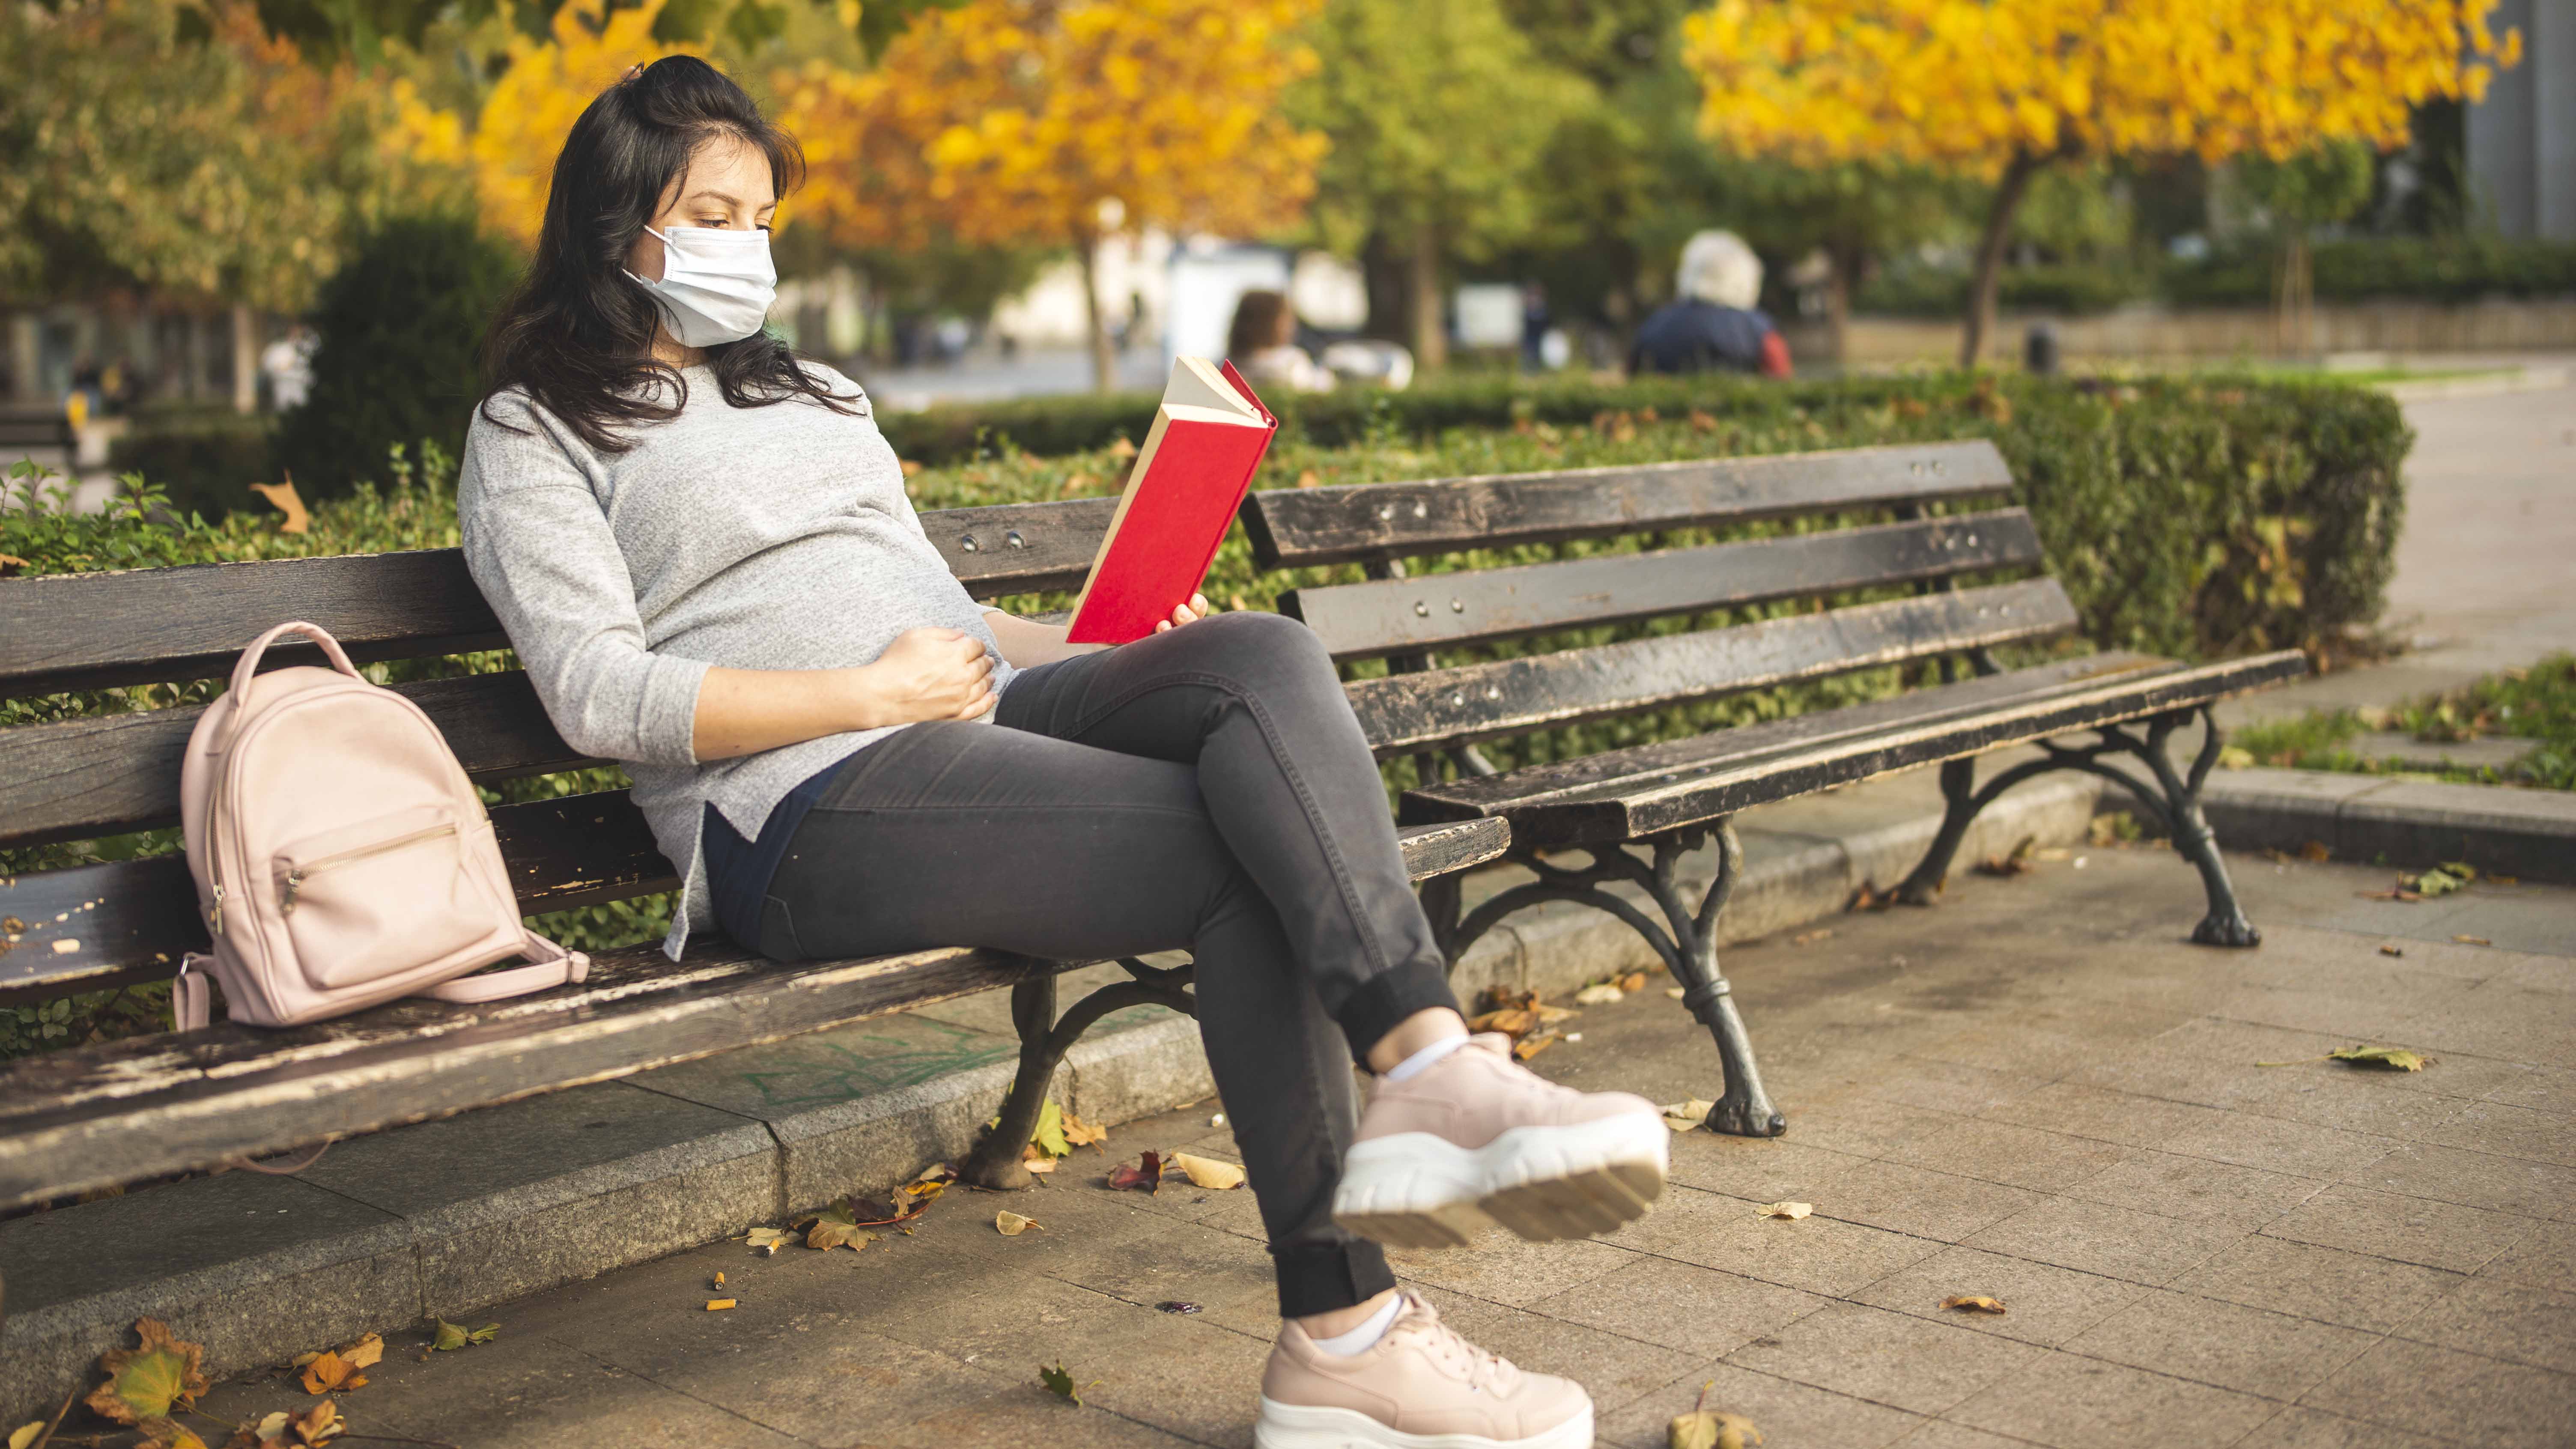 Young pregnant woman with protective face mask reading book sitting on a bench in city park in autumn.